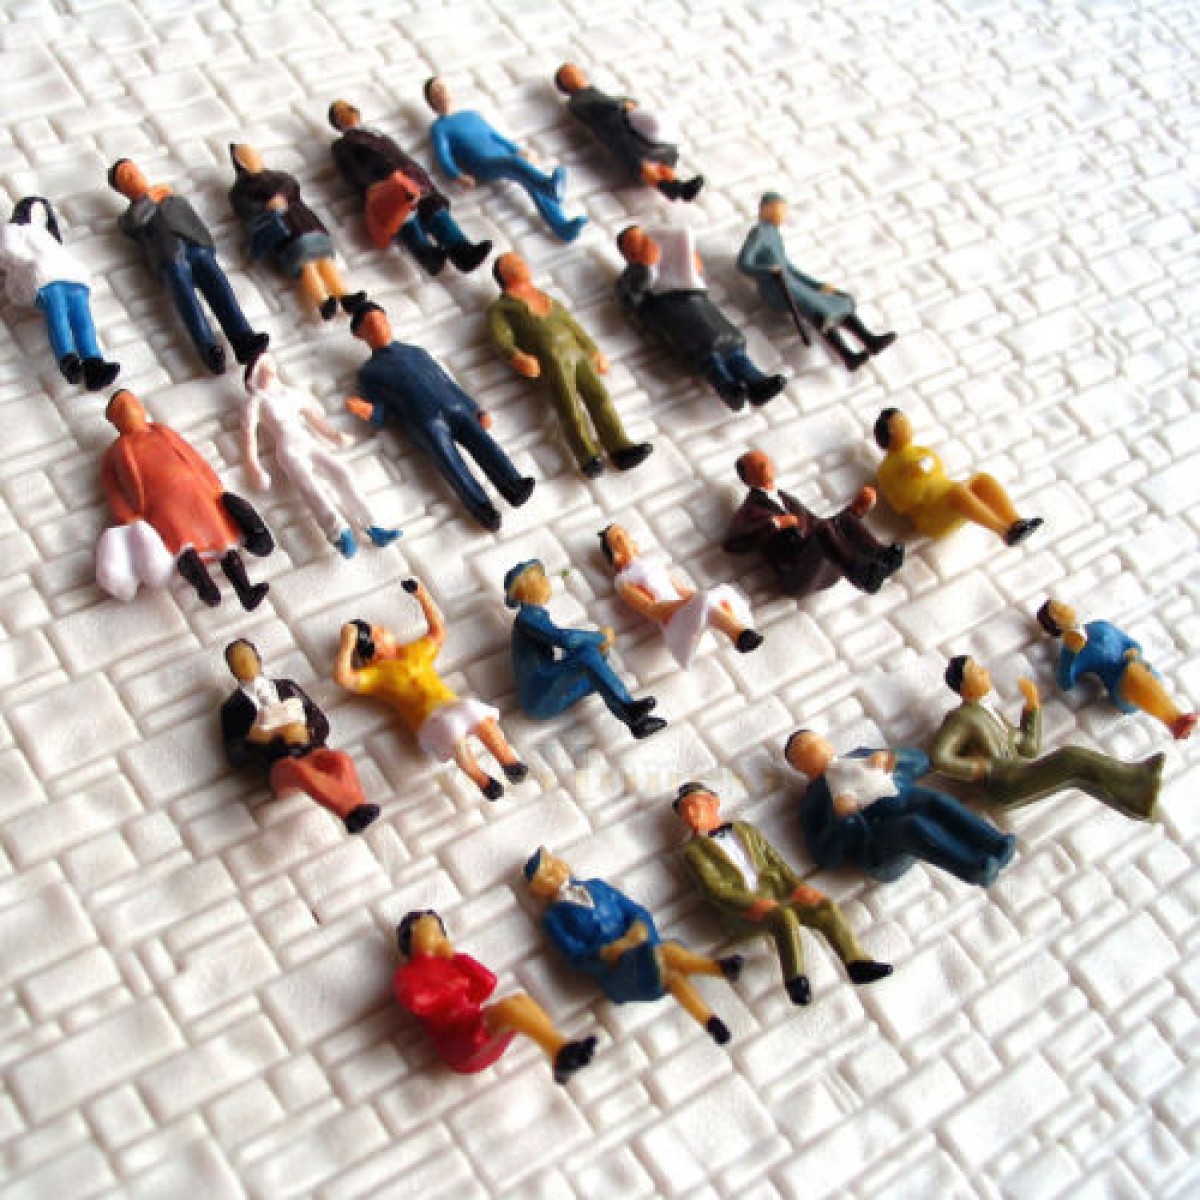  24 pcs HO scale Model People Painted Figure with half Seated Passenger scenery